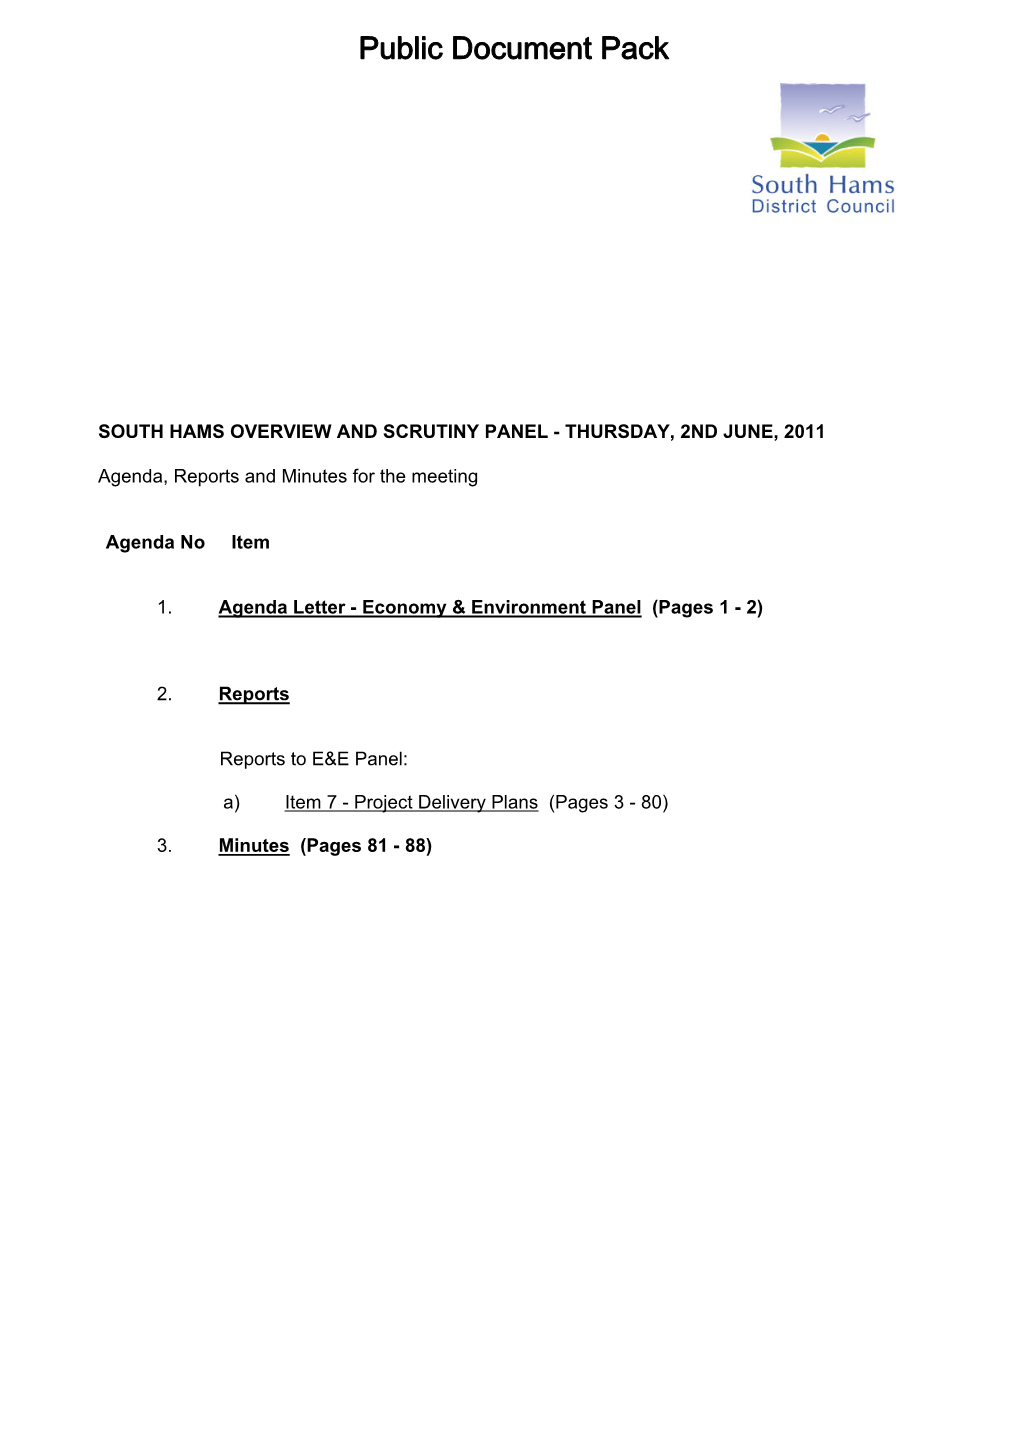 (Public Pack)Agenda Document for South Hams Overview and Scrutiny